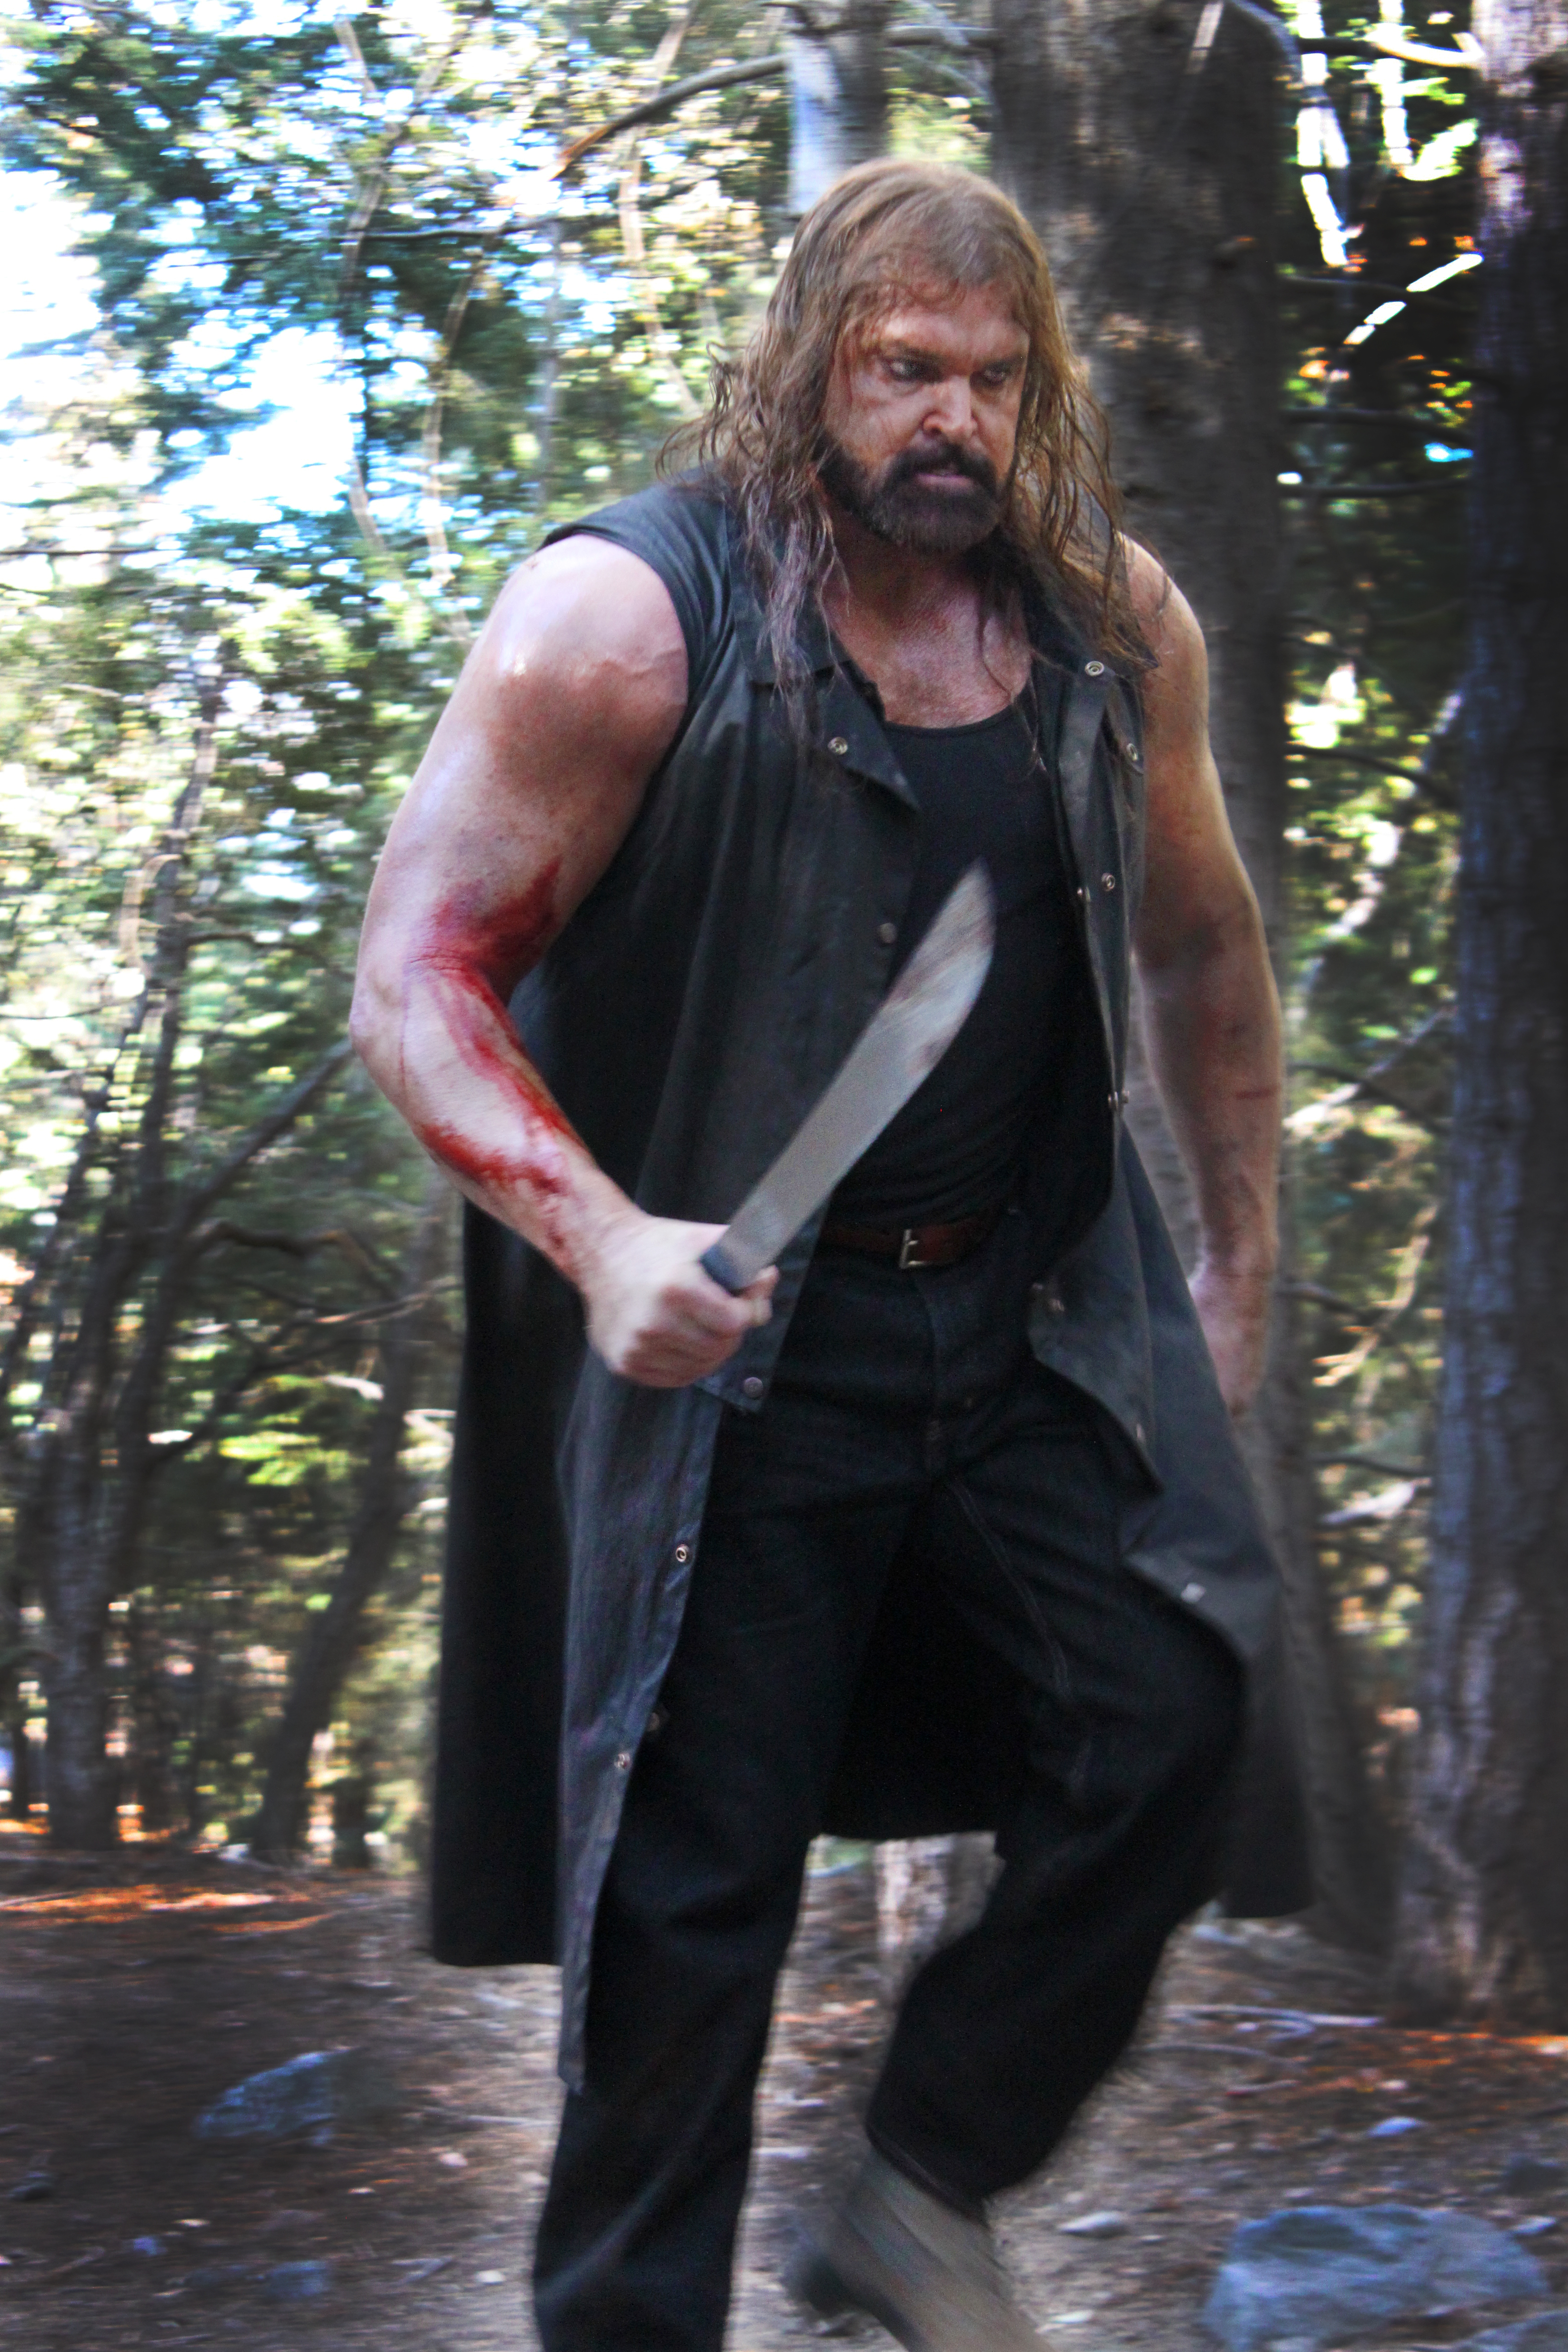 More Axeman 2, early 2015 release.